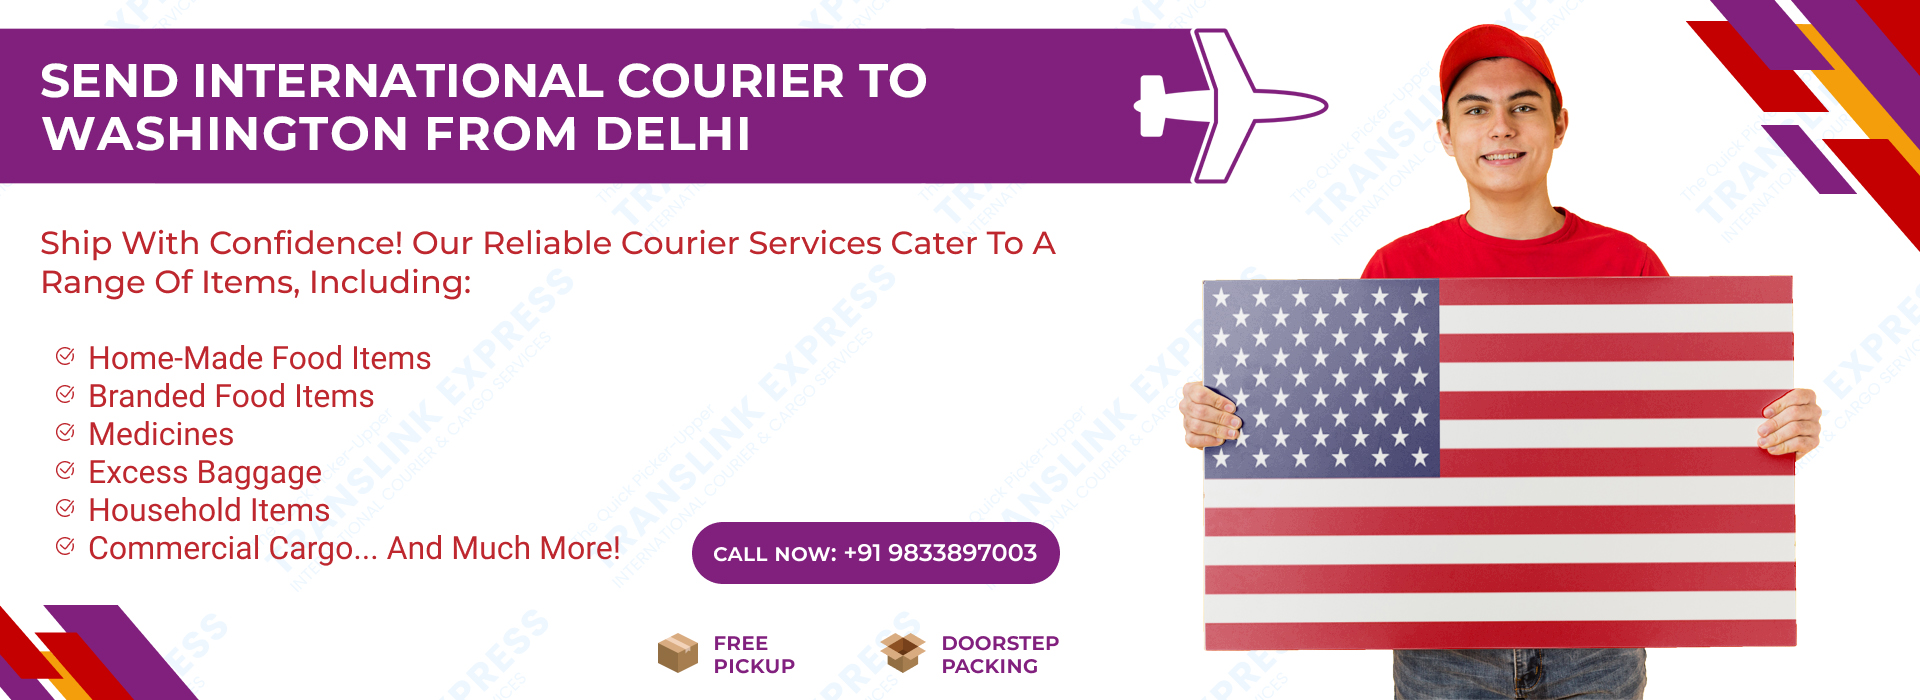 Courier to Washington From Delhi